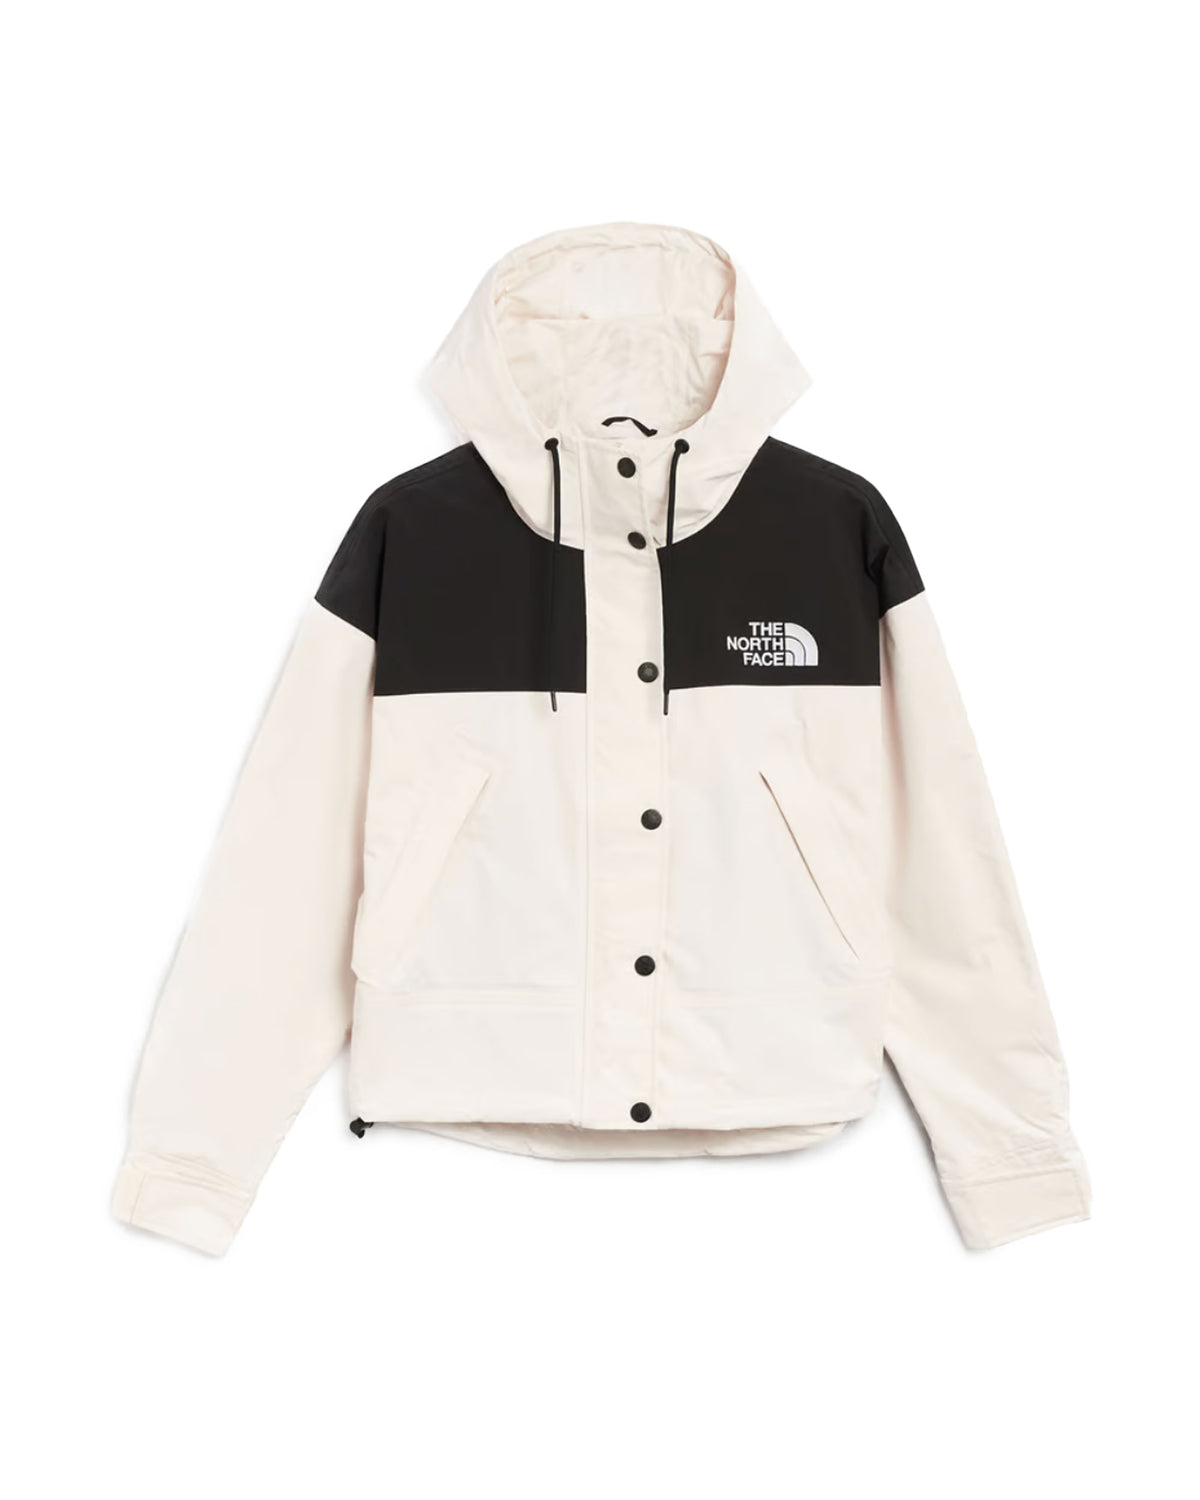 Woman's Jacket The North Face Reign On White